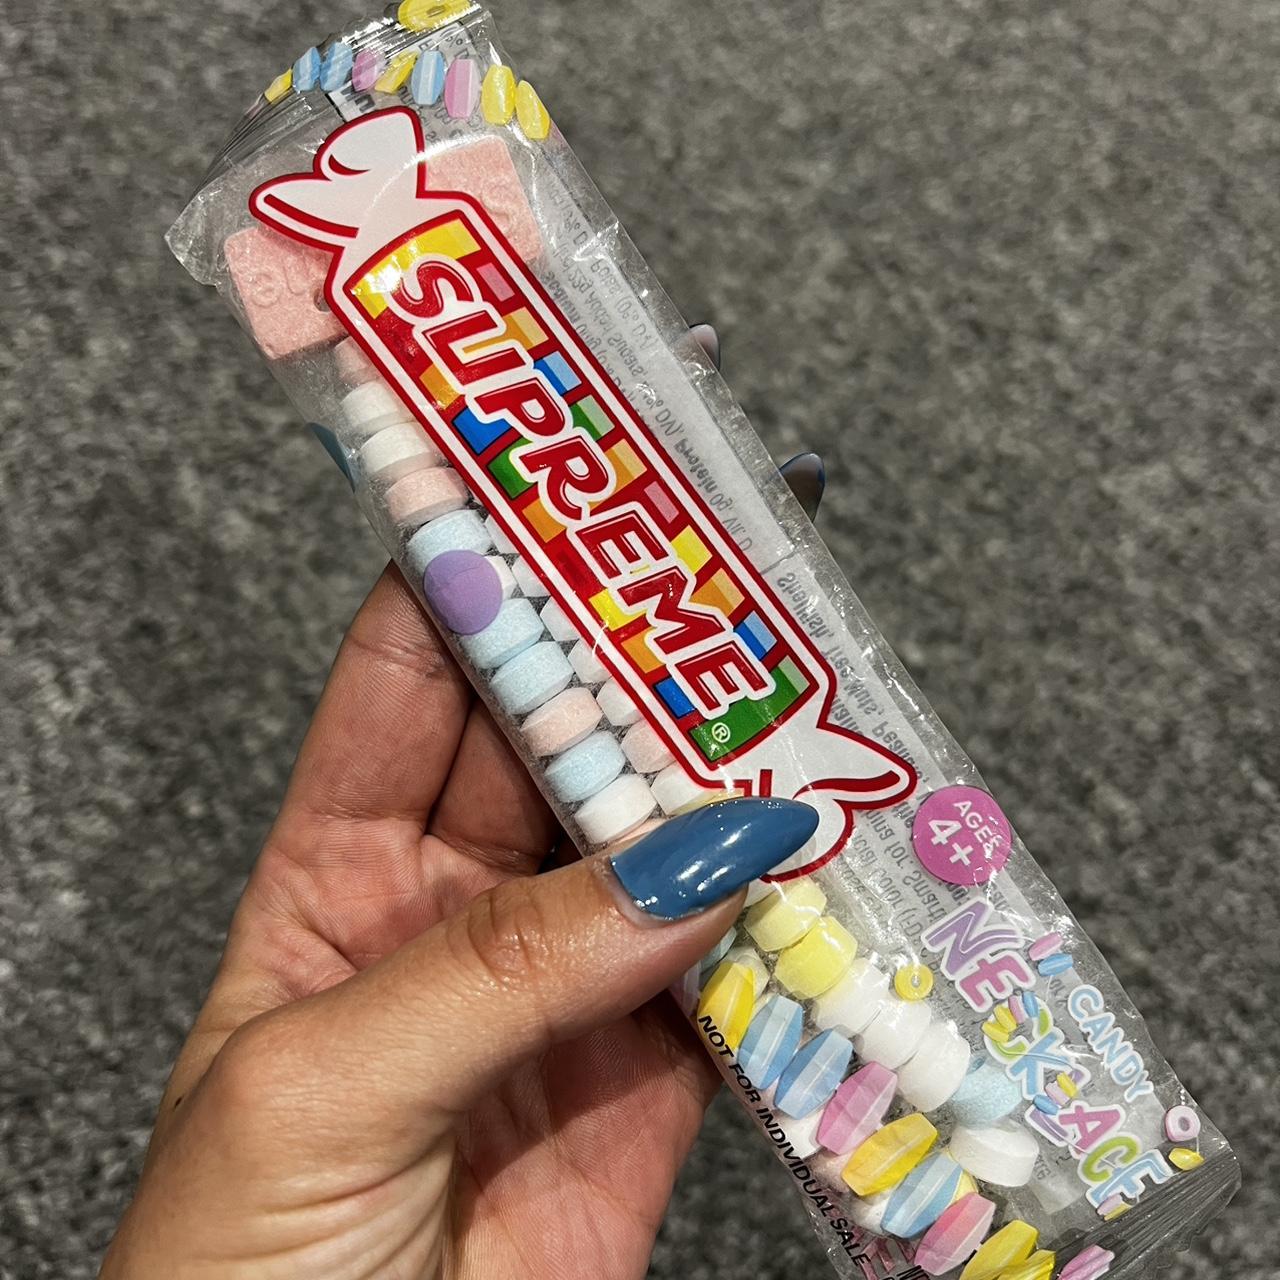 Supreme Smarties Candy Necklace 8x Lot (Not Fit For Human Consumption) Supreme Smarties Candy Necklace 8x Lot (Not Fit For Human Consumption) -  OFour